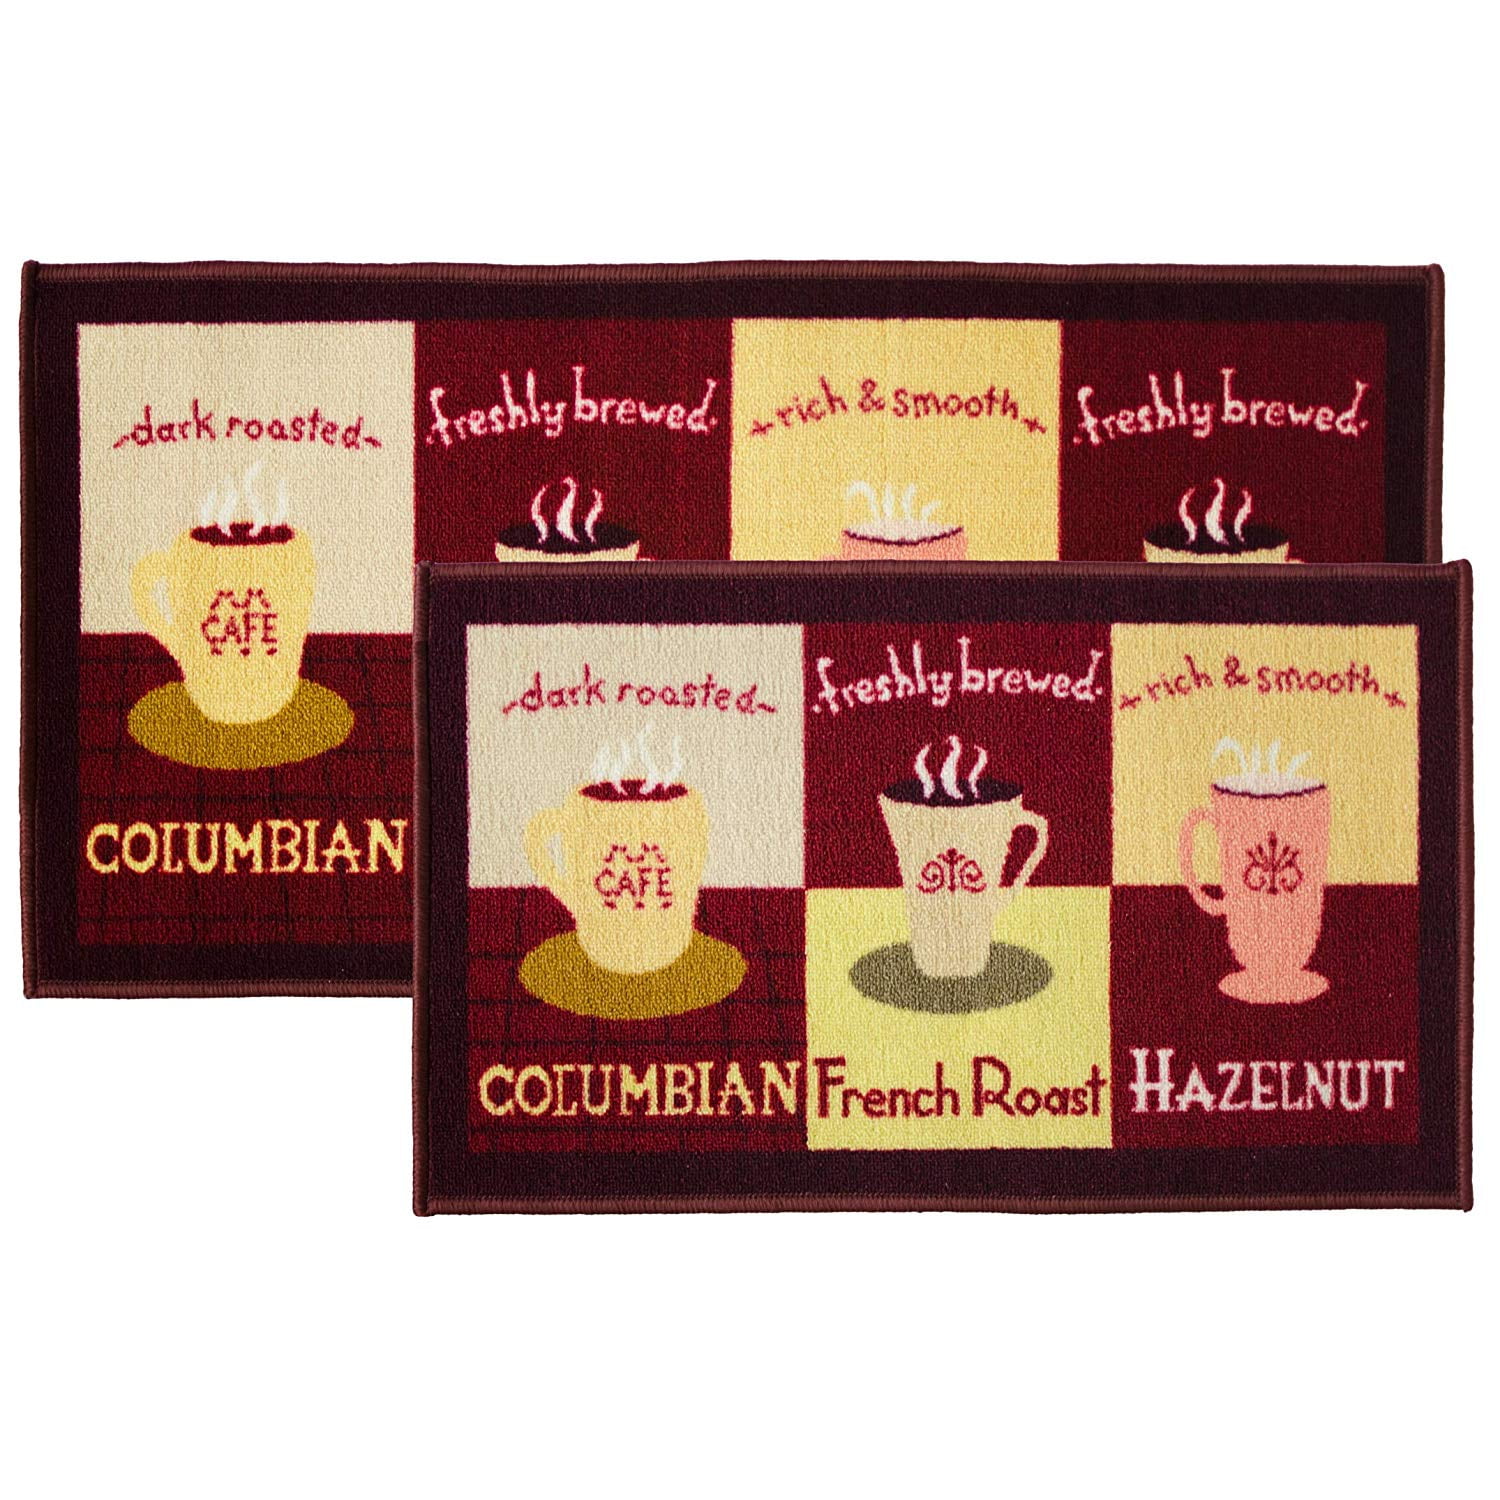 & WINE & CHEESE IN SQUARES,KH 20"x40" 18"x30" SET OF 2 PRINTED KITCHEN RUGS 